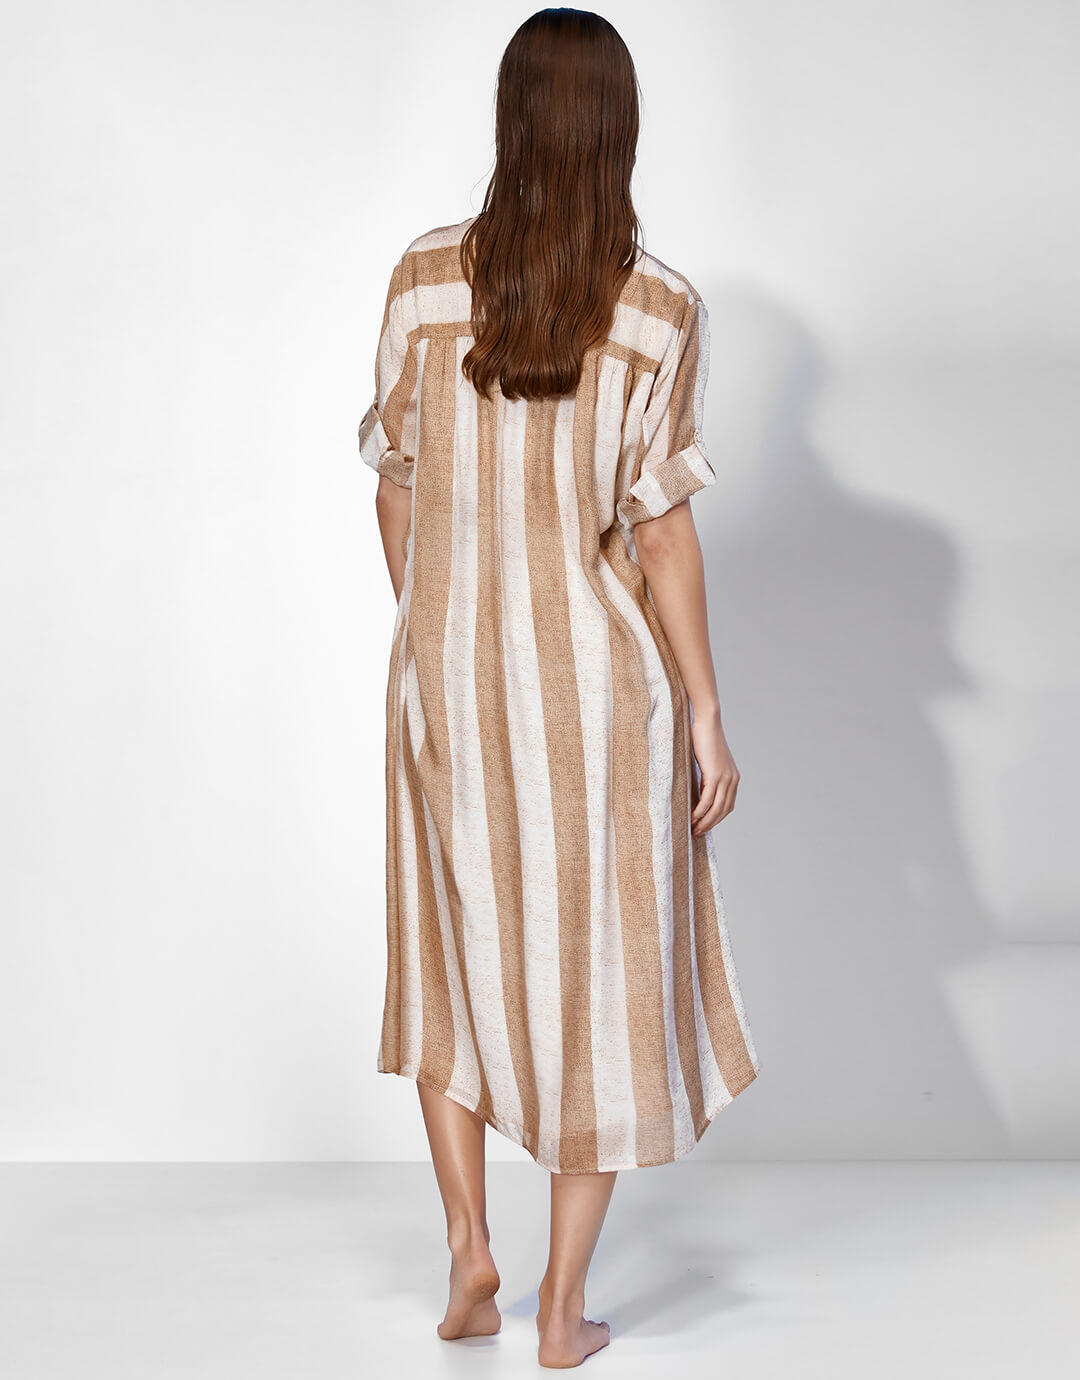 Belted Long Dress - Sand Ivory - Simply Beach UK